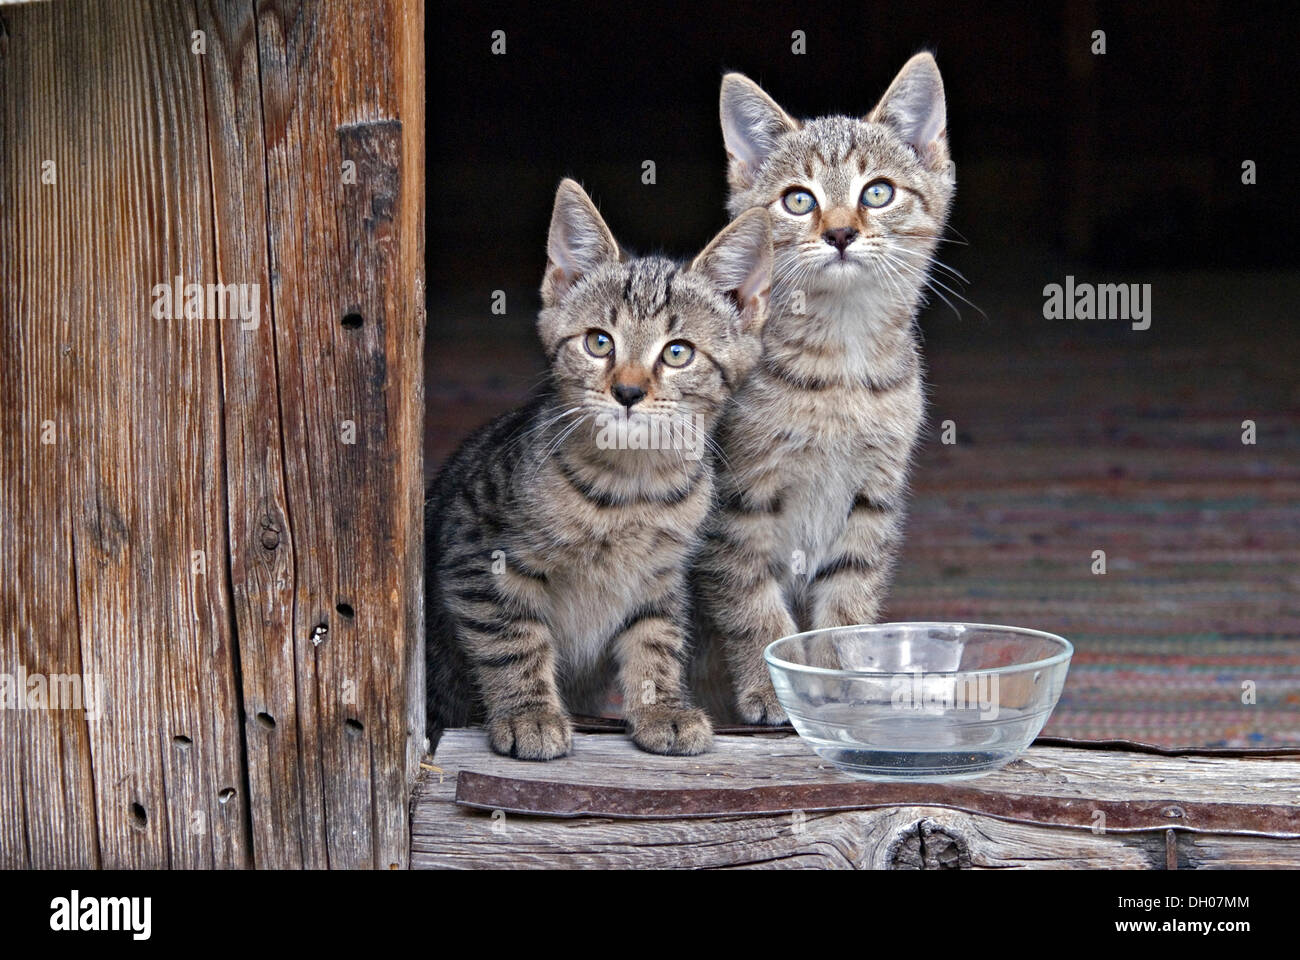 Young domestic cats, kittens, Eng-Alm, Karwendel Mountains, Tyrol, Austria, Europe Stock Photo